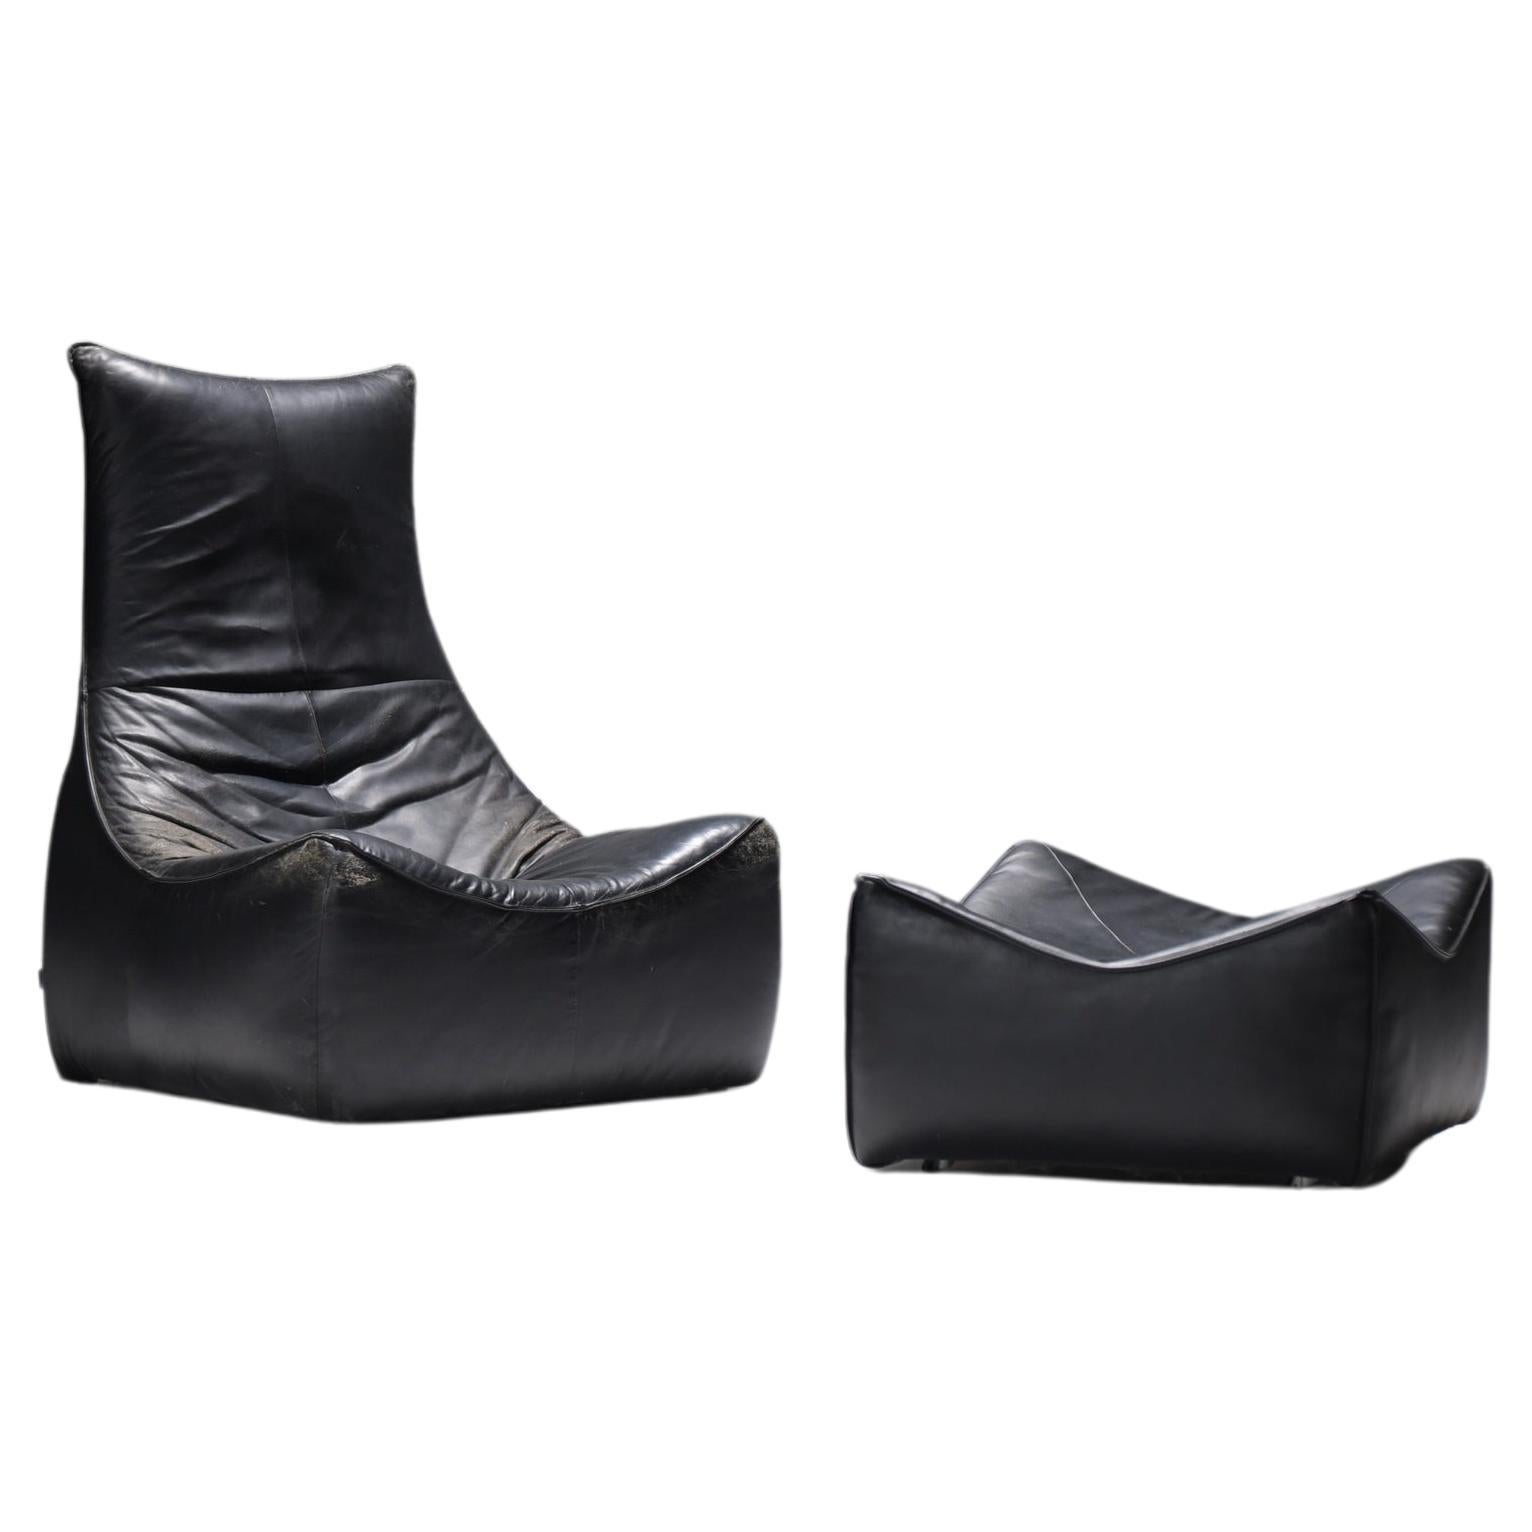 Stunning lounge chair The Rock in black leather by Gerard Van Den Berg - Montis For Sale